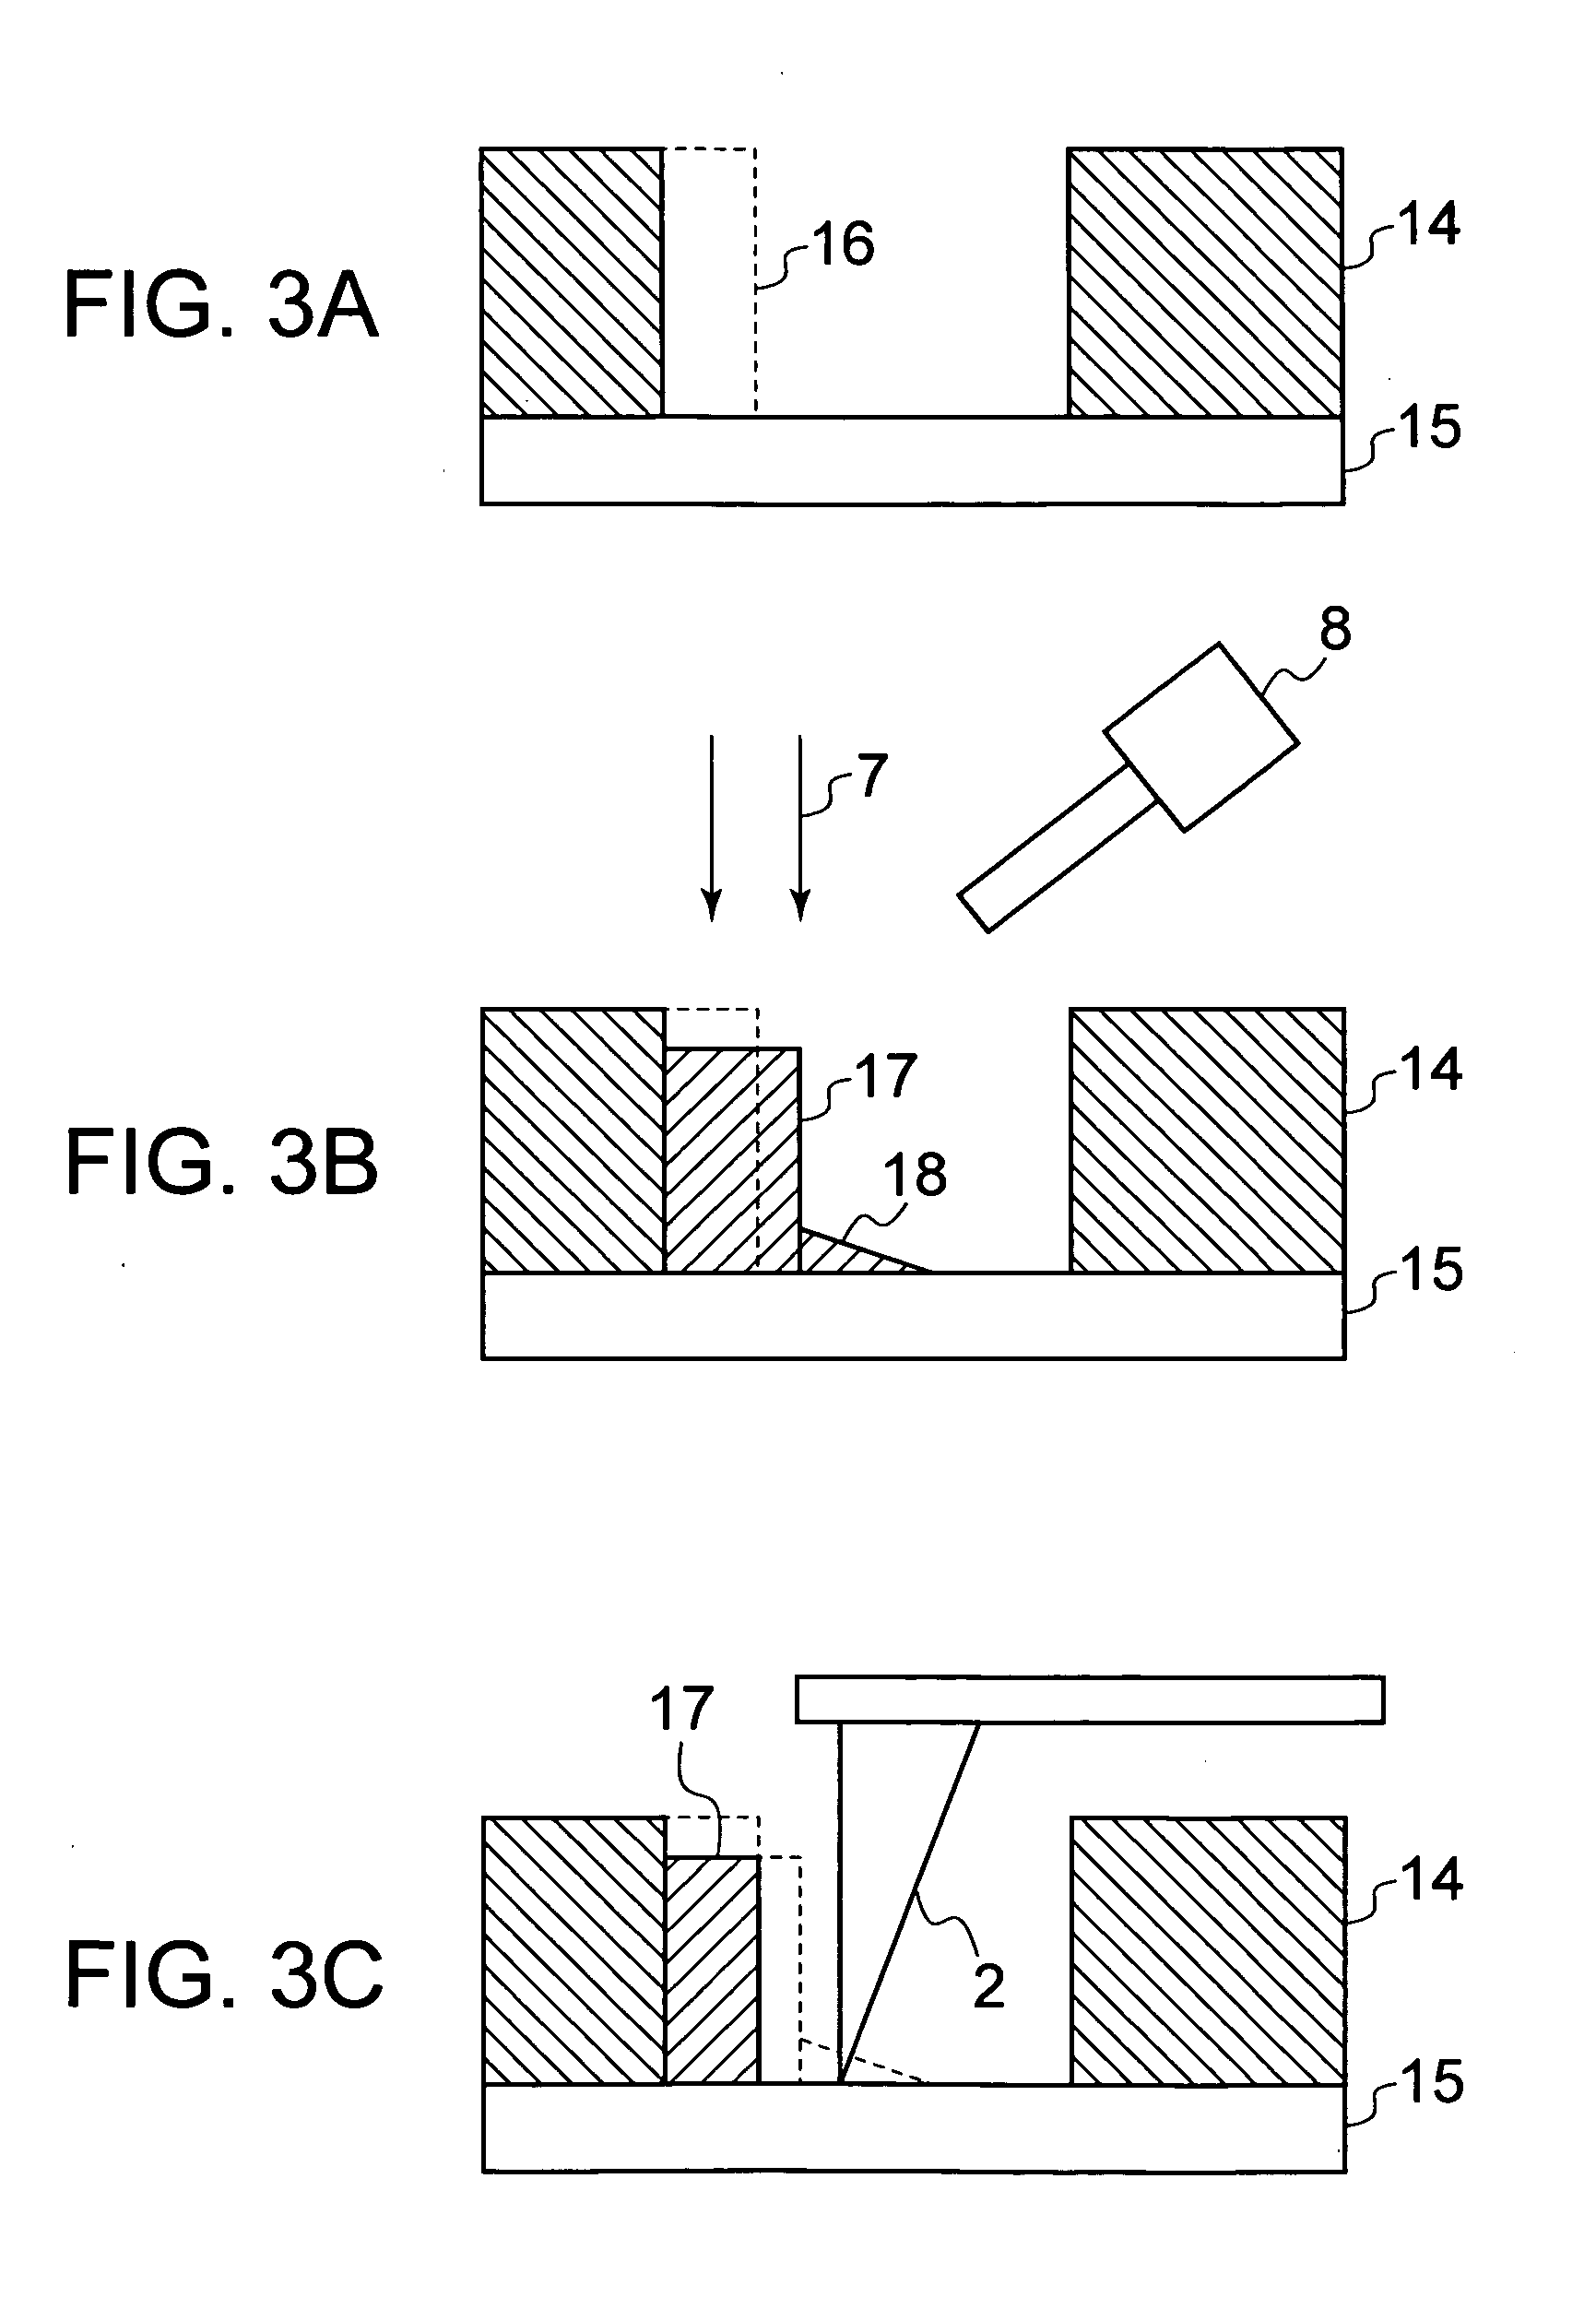 Photomask defect correction method employing a combined device of a focused electron beam device and an atomic force microscope